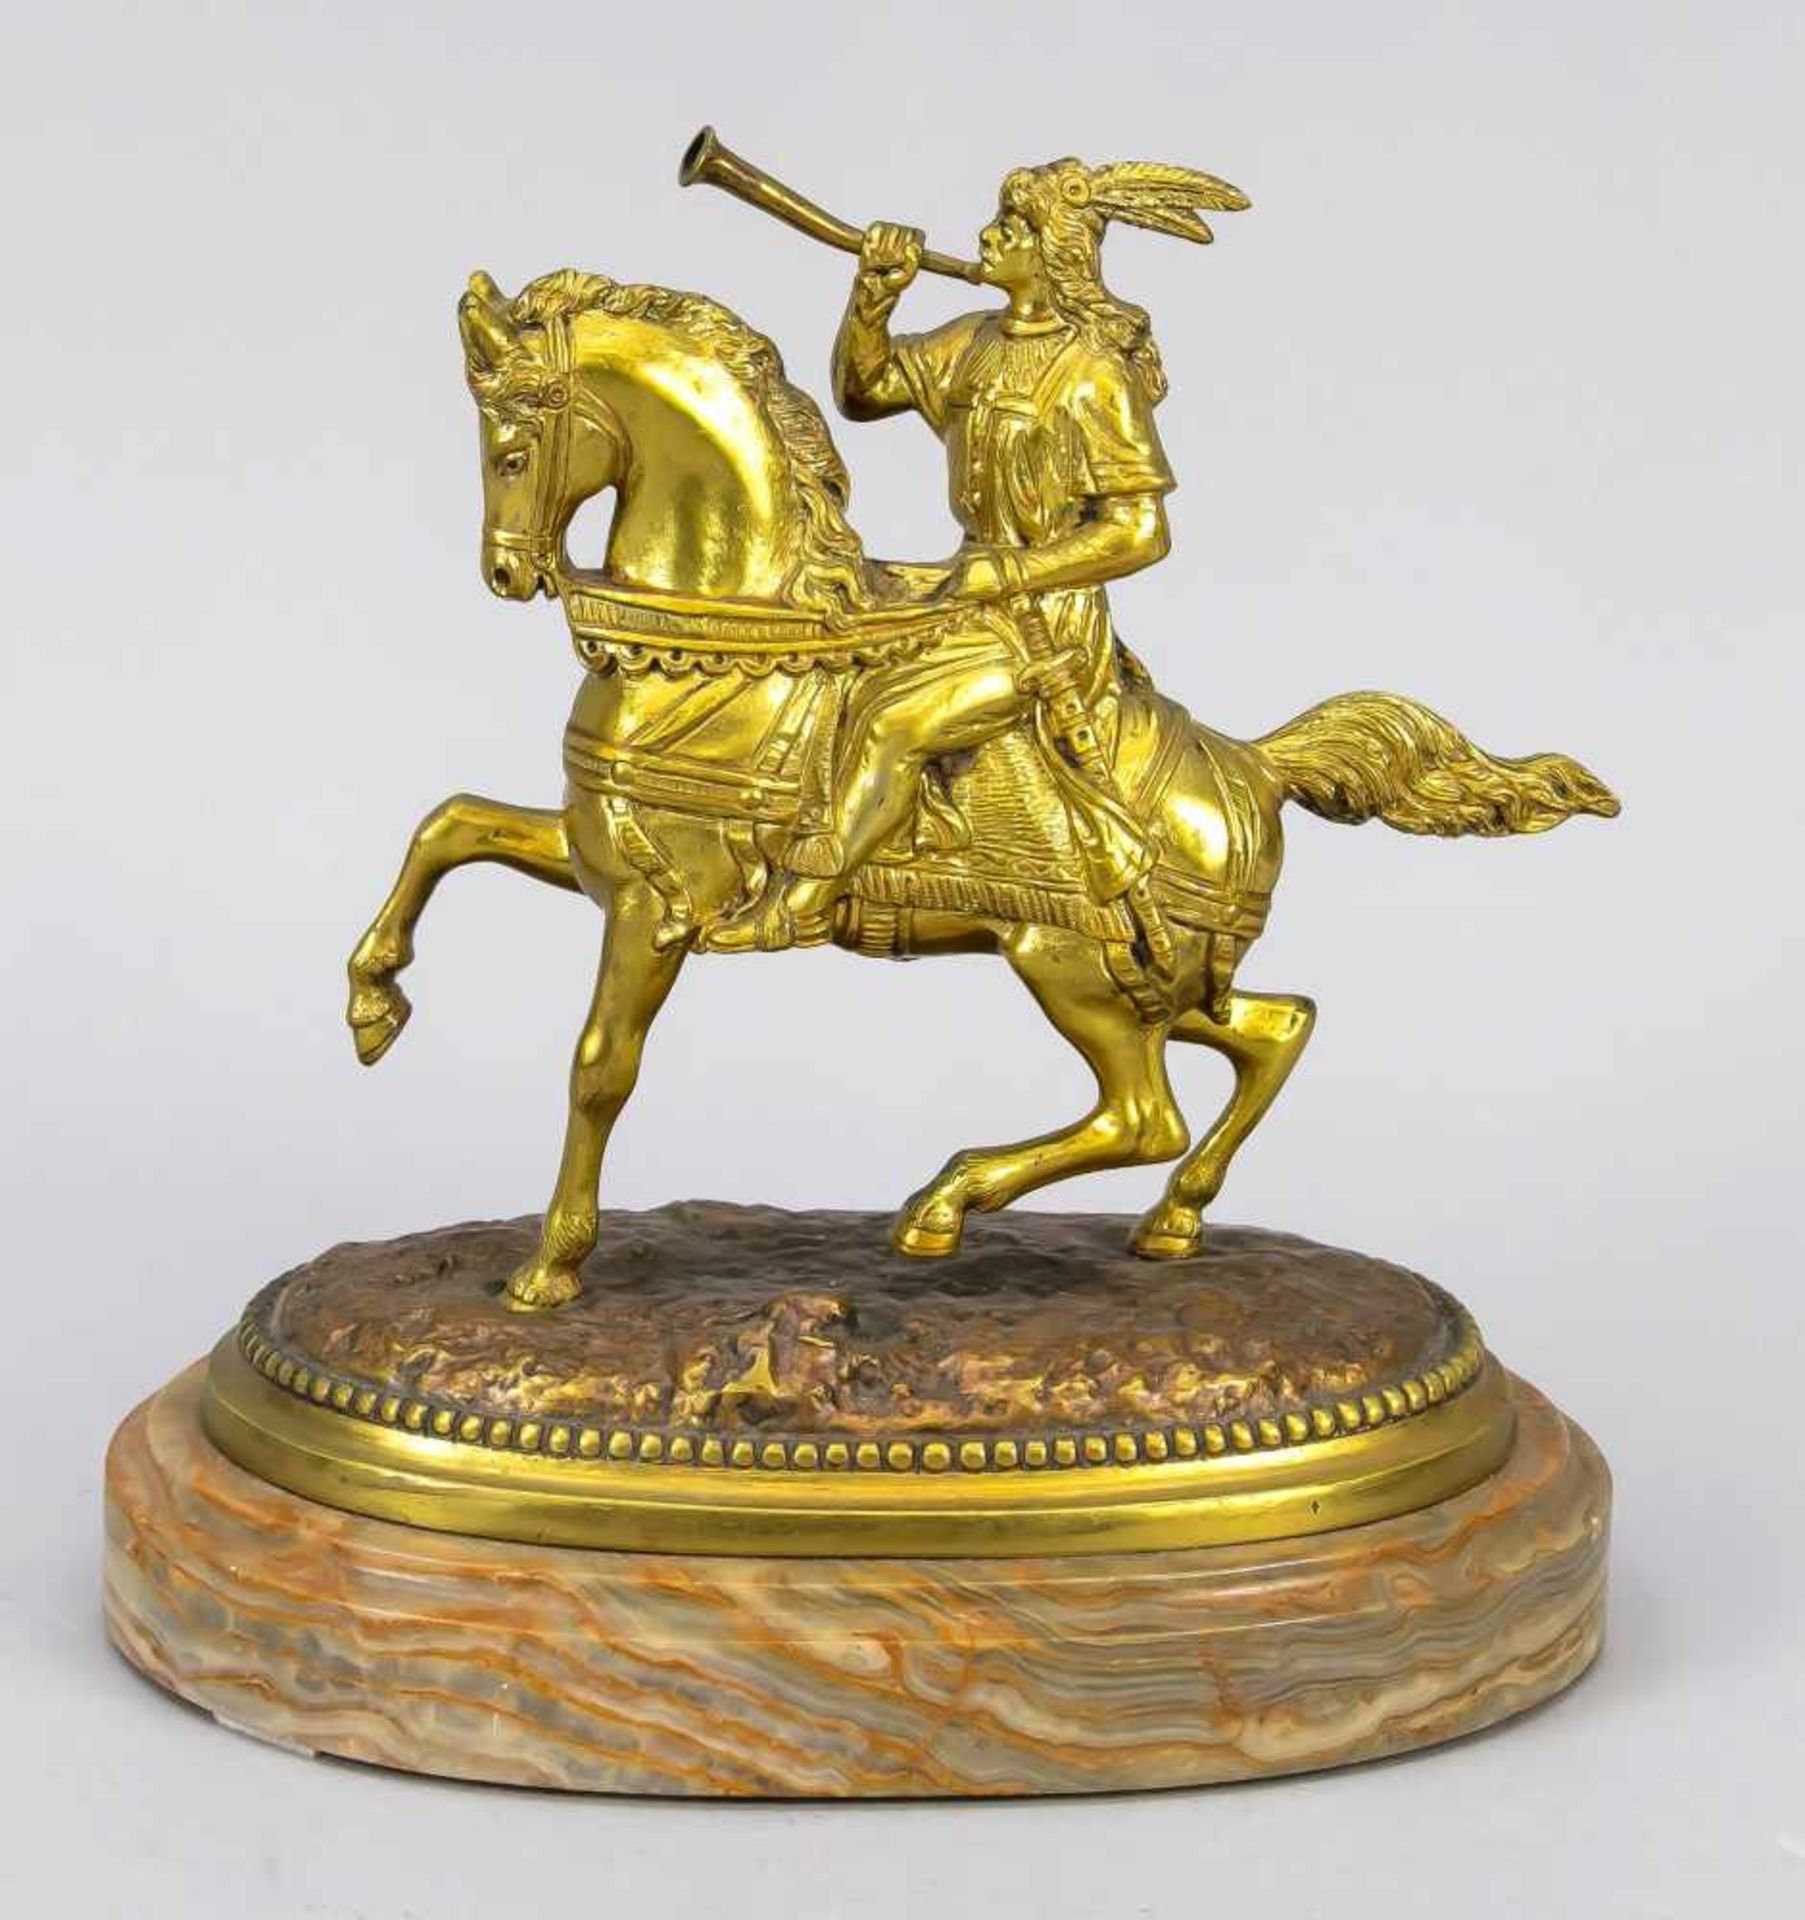 Anonymous, probably Russian 19th century sculptor, mounted Tatar blowing a horn, gildedbronze over